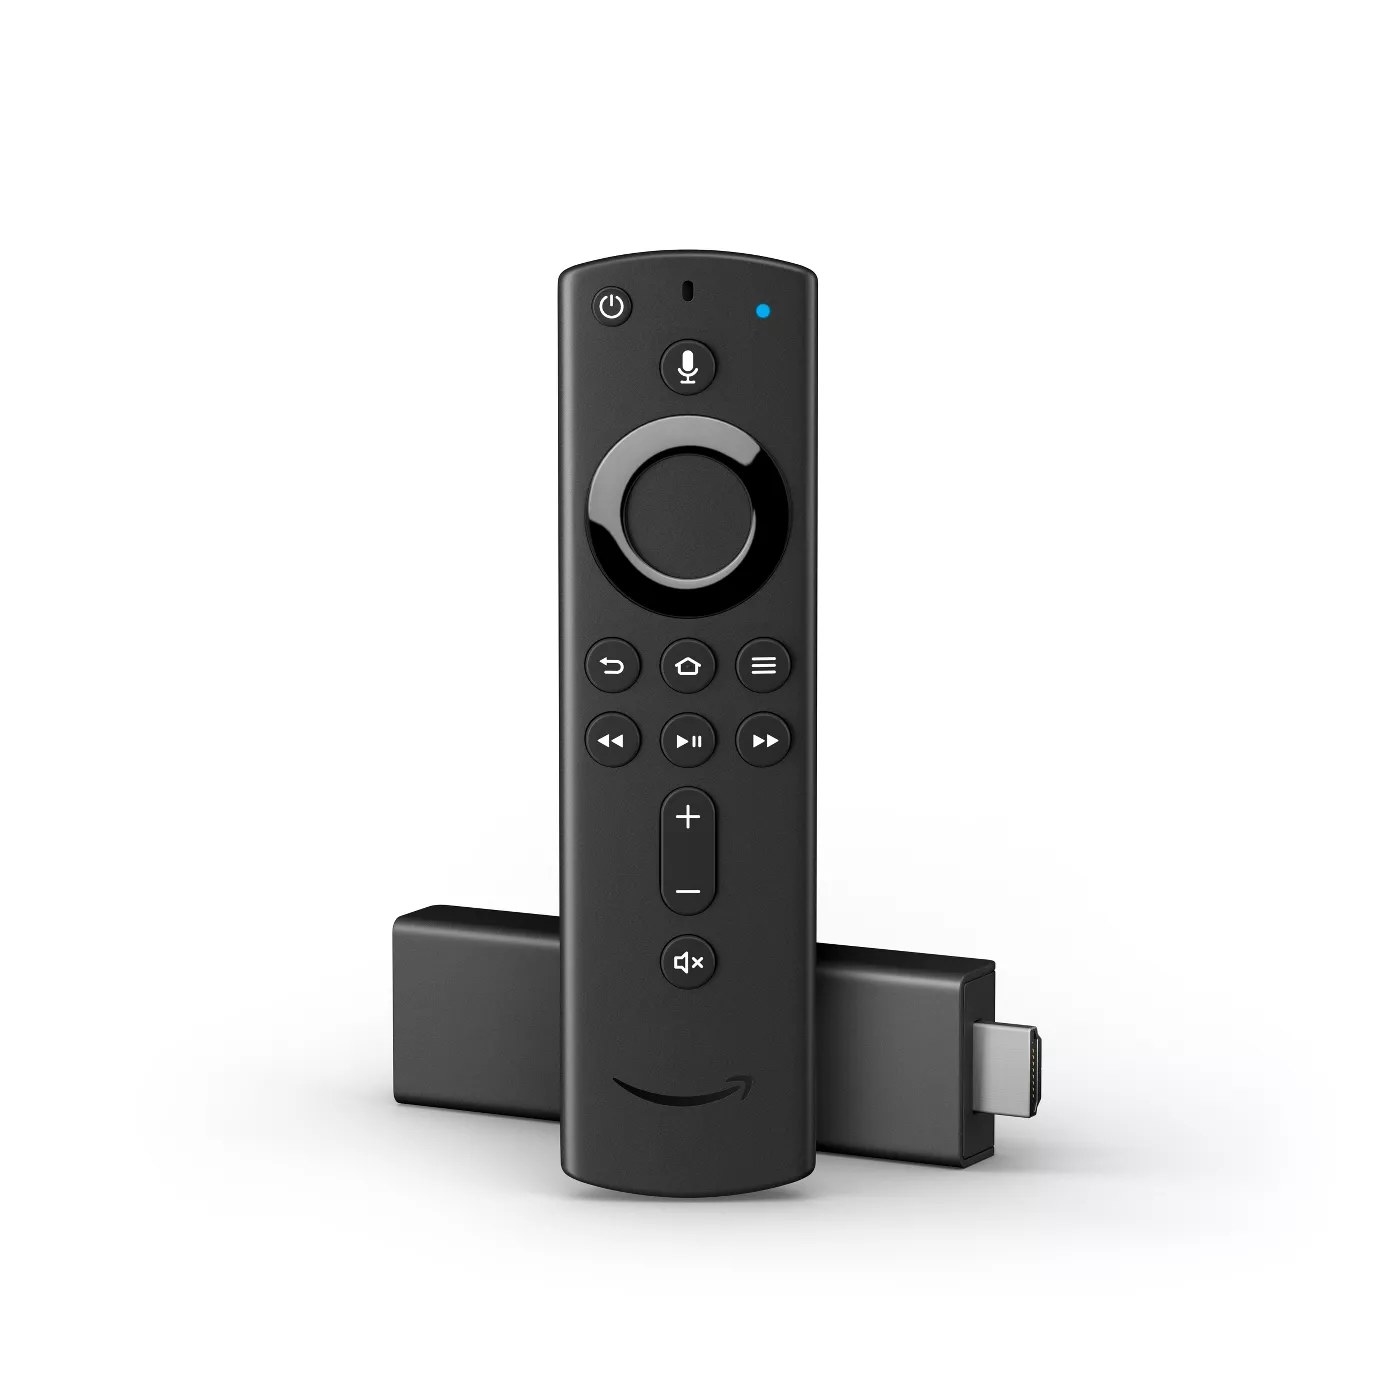 The remote and fire stick